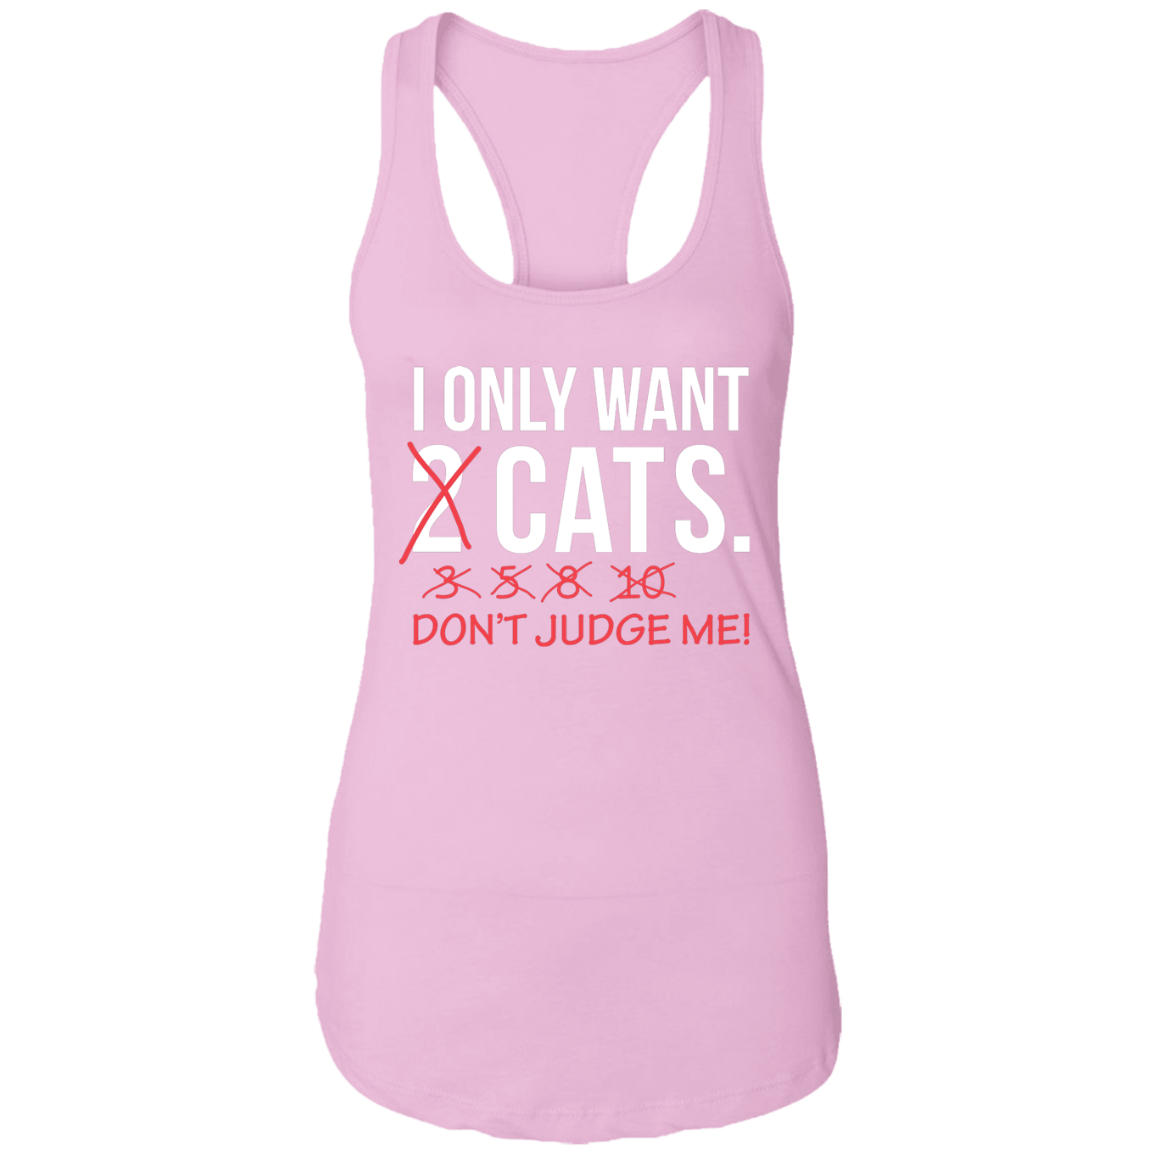 I Only Want 2 Cats - Ladies Racer Back Tank.